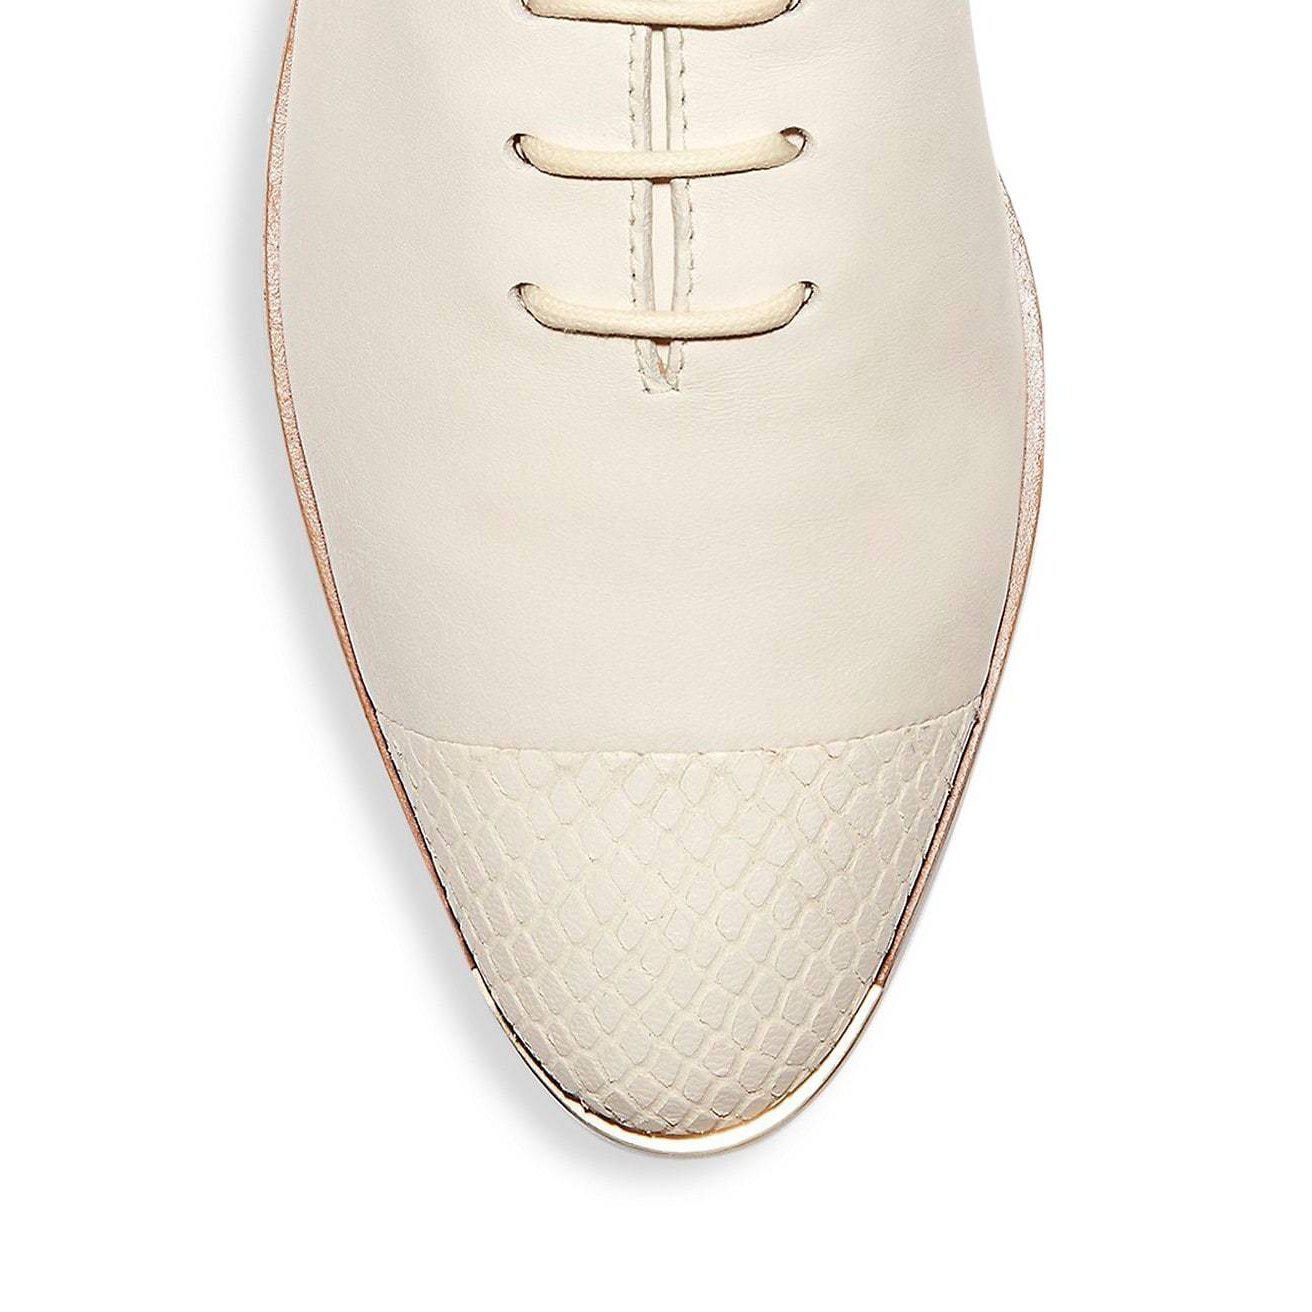 Grand Ambition Lace Up Oxford